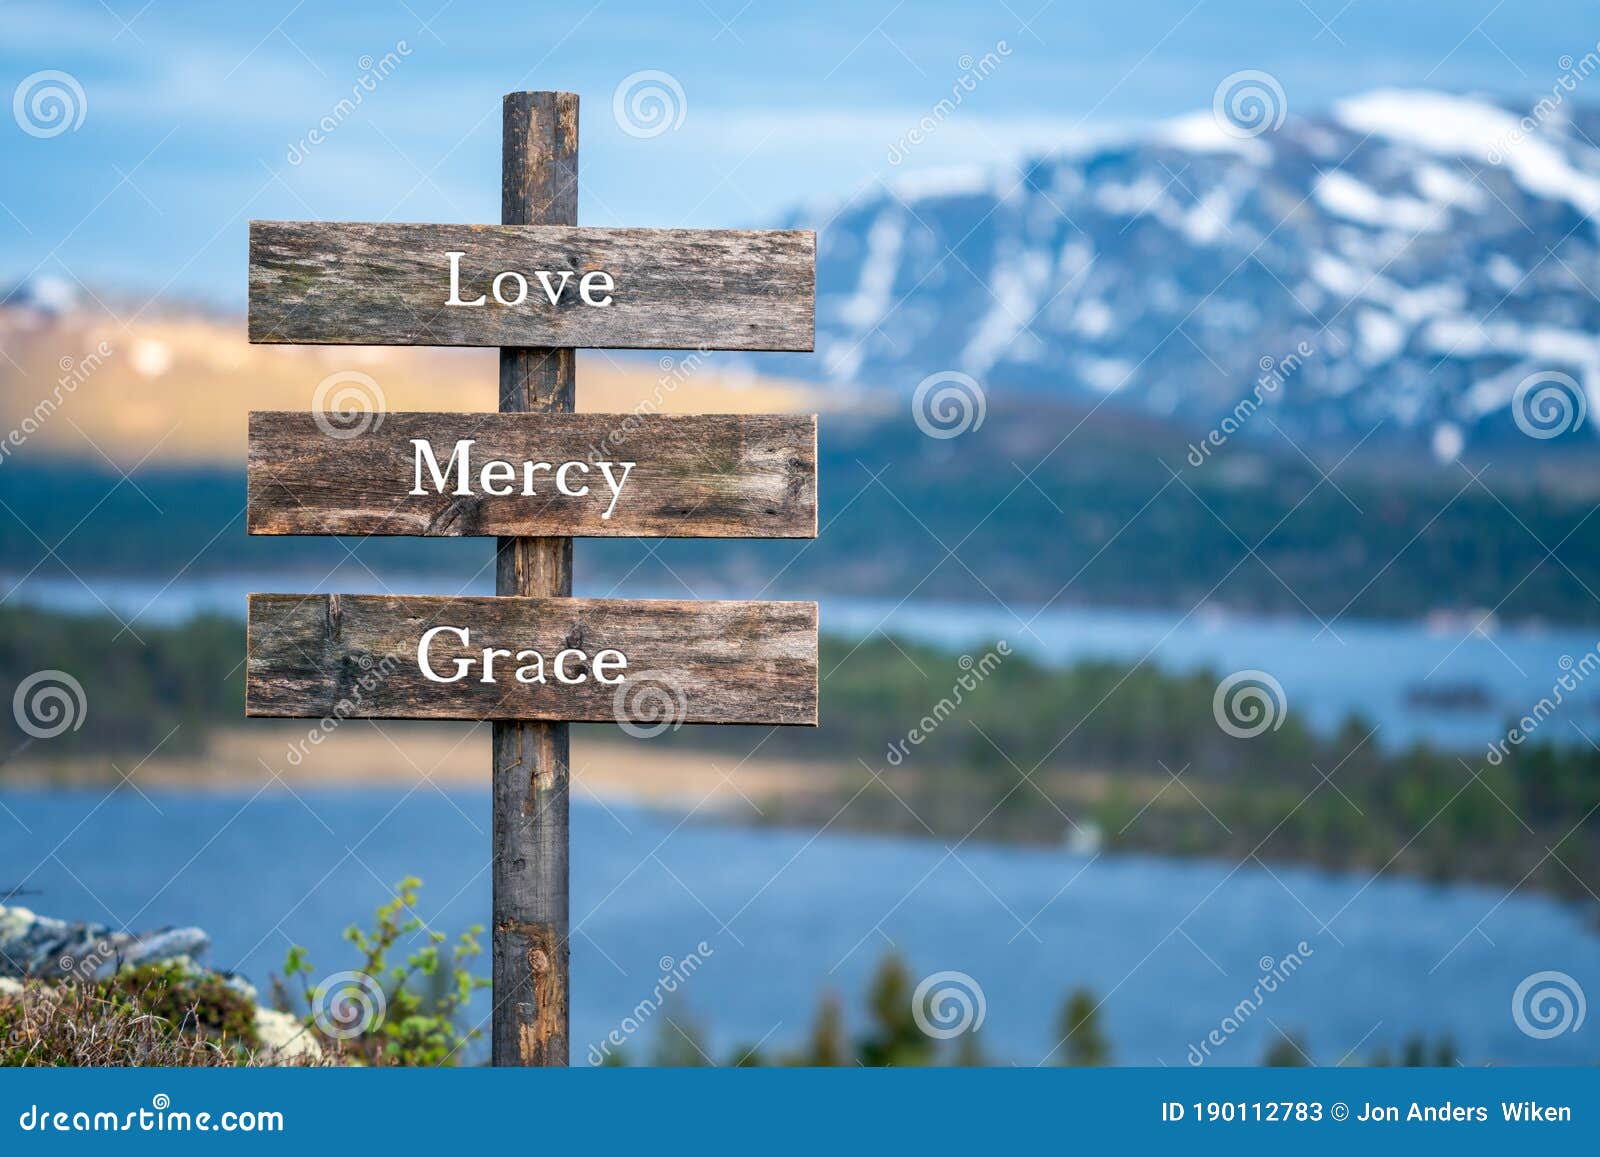 love mercy and grace text on wooden signpost